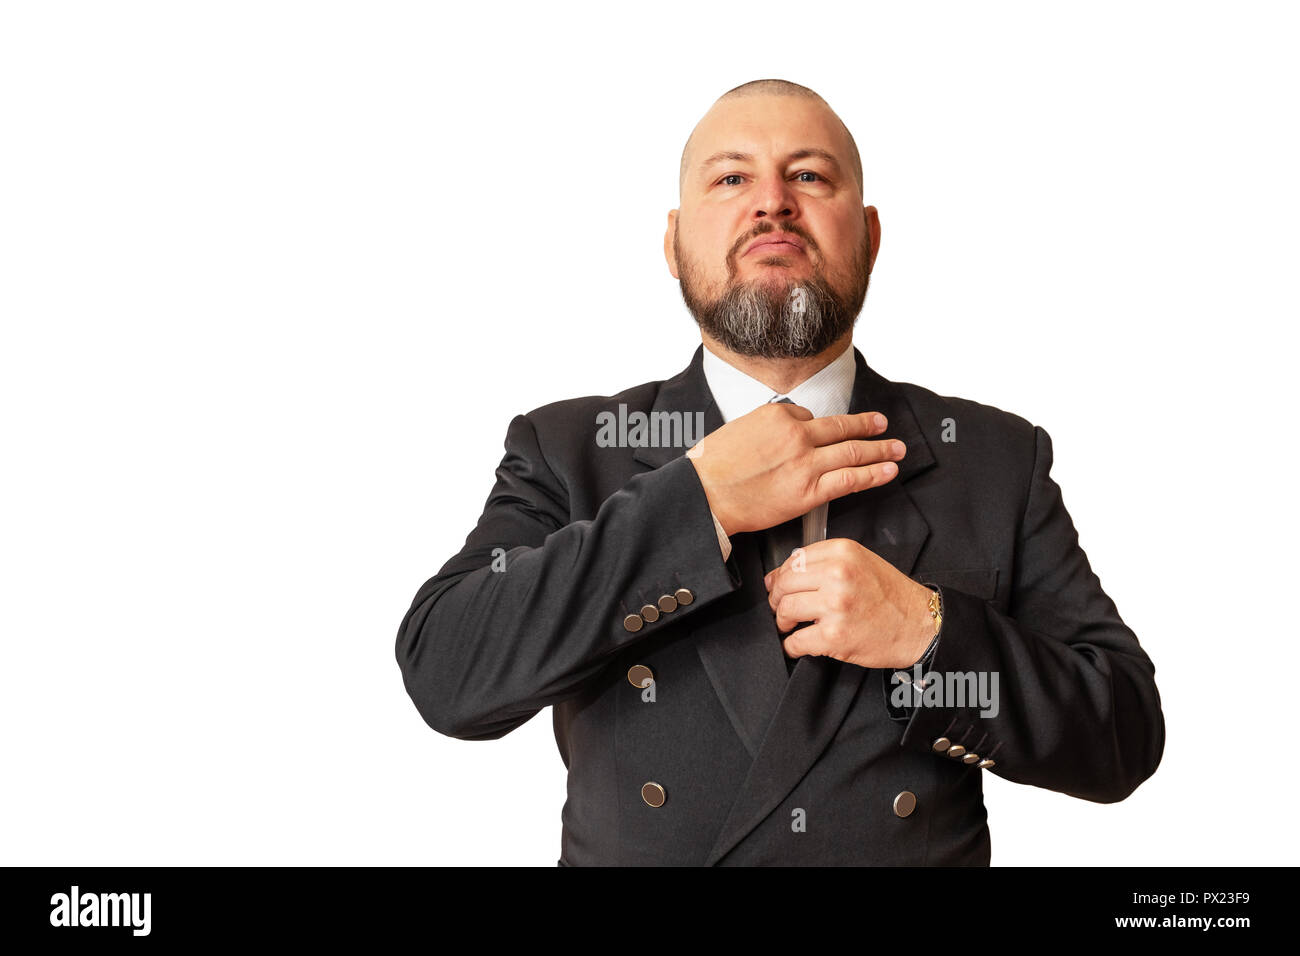 Respectable man demonstrates his superiority and straightens his tie around his neck. Stock Photo